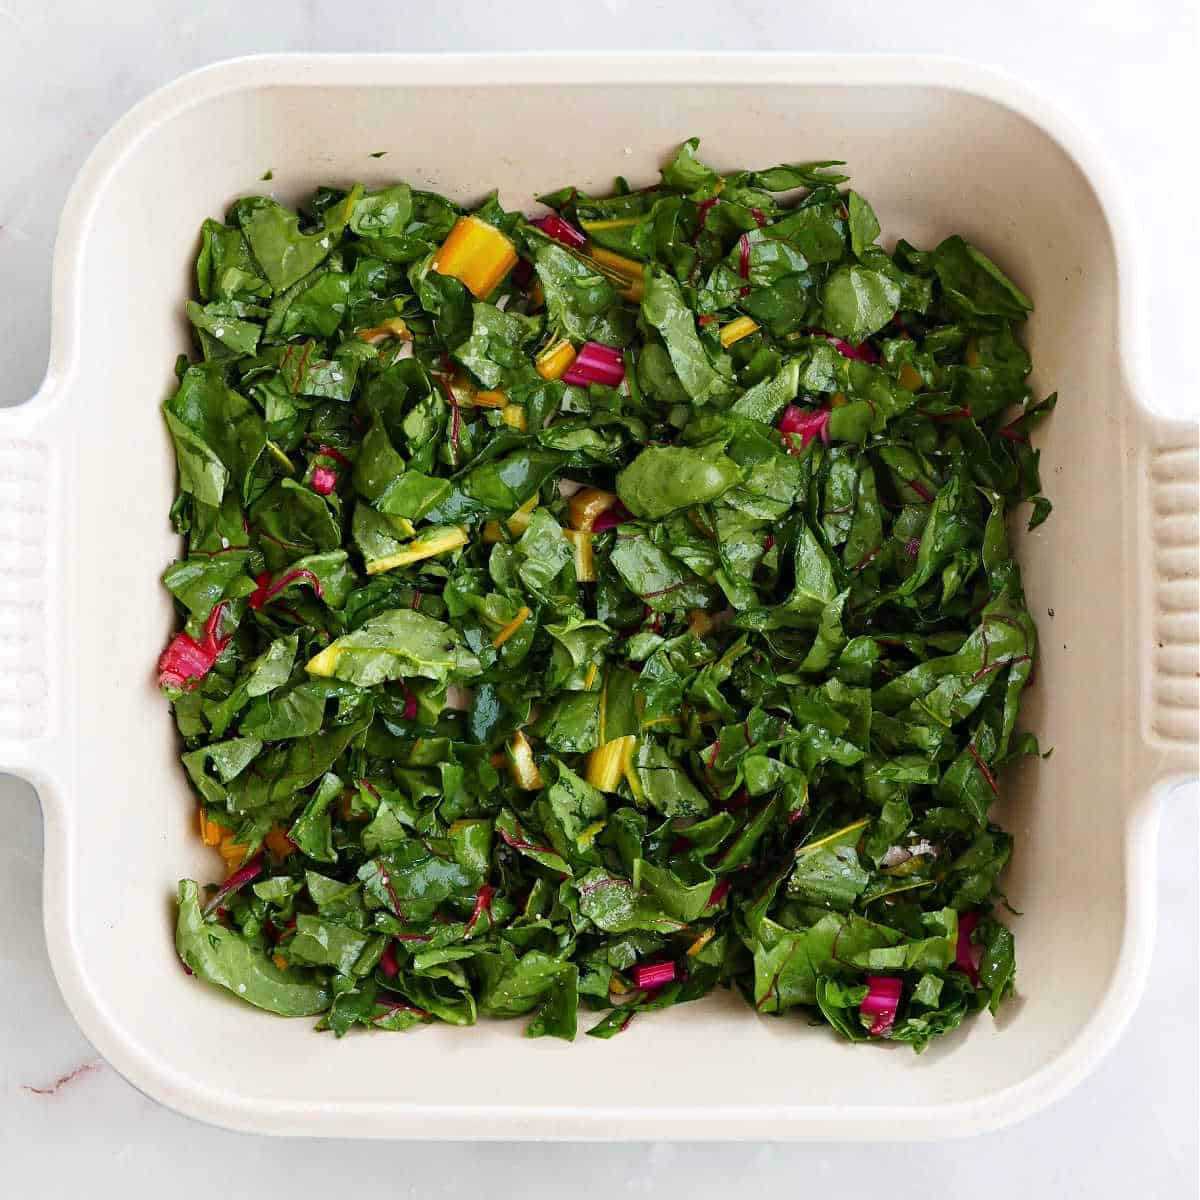 chard leaves and stems spread out in a square casserole dish